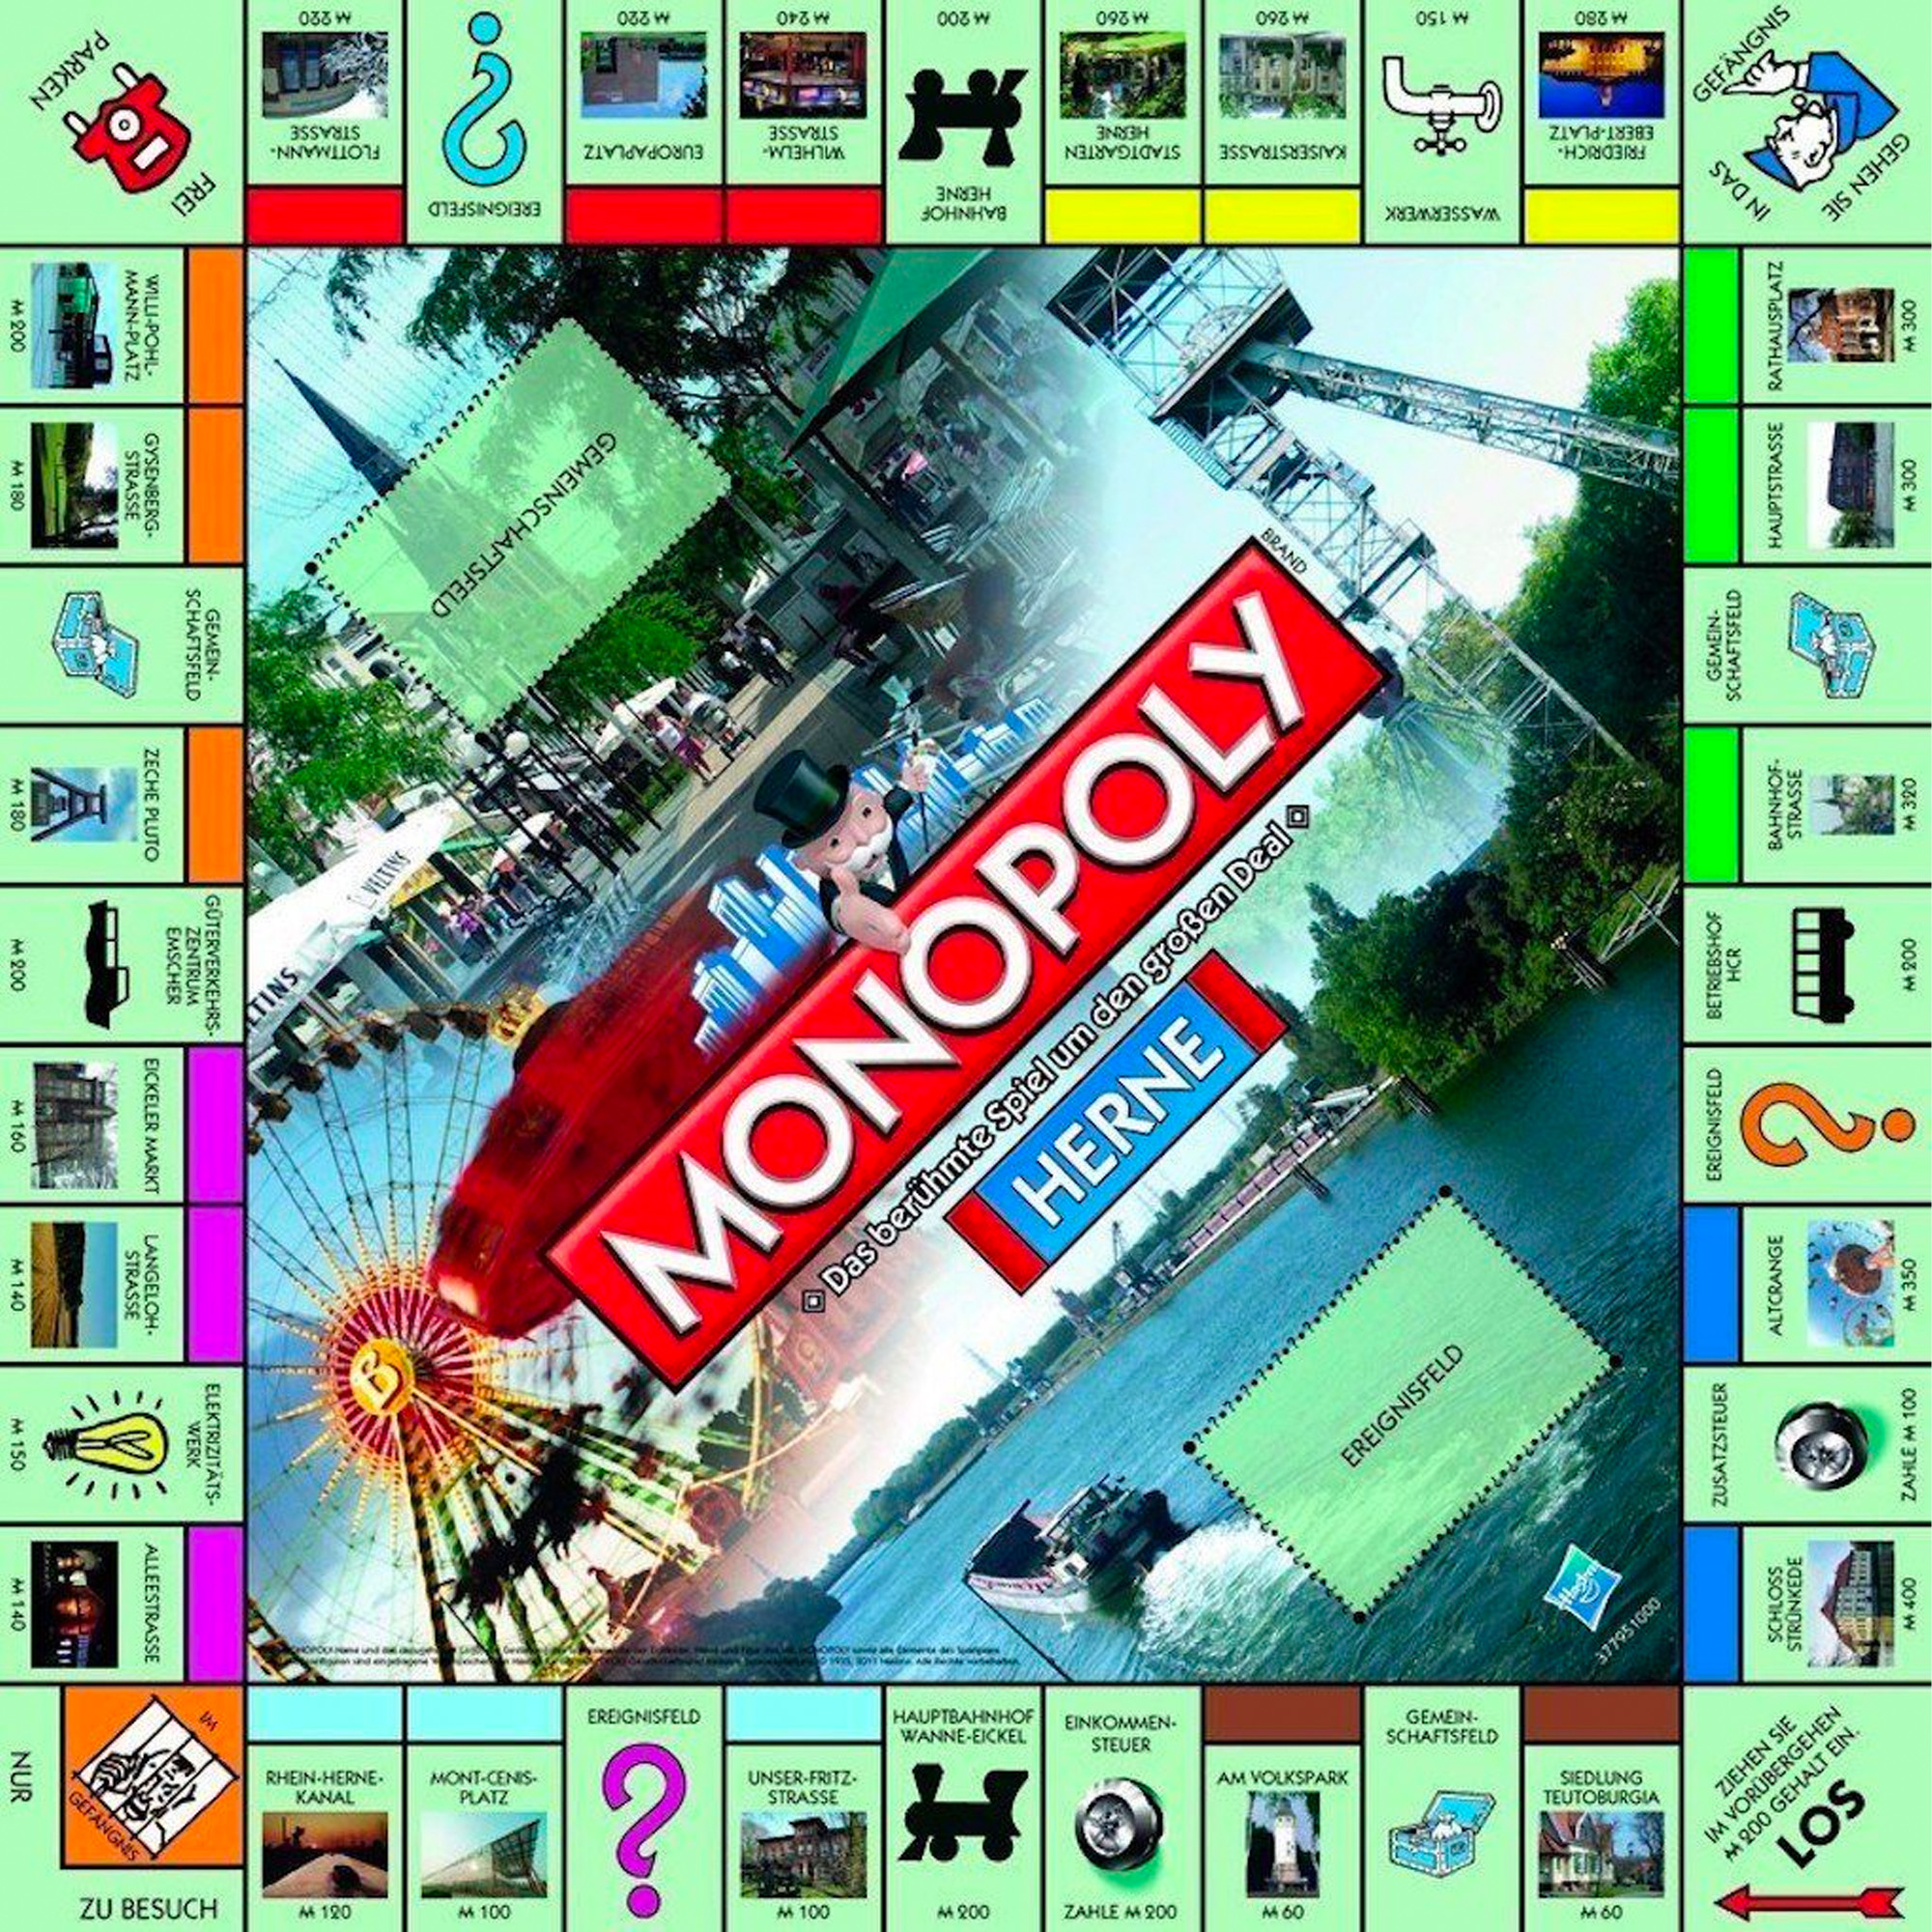 Monopoly Herne